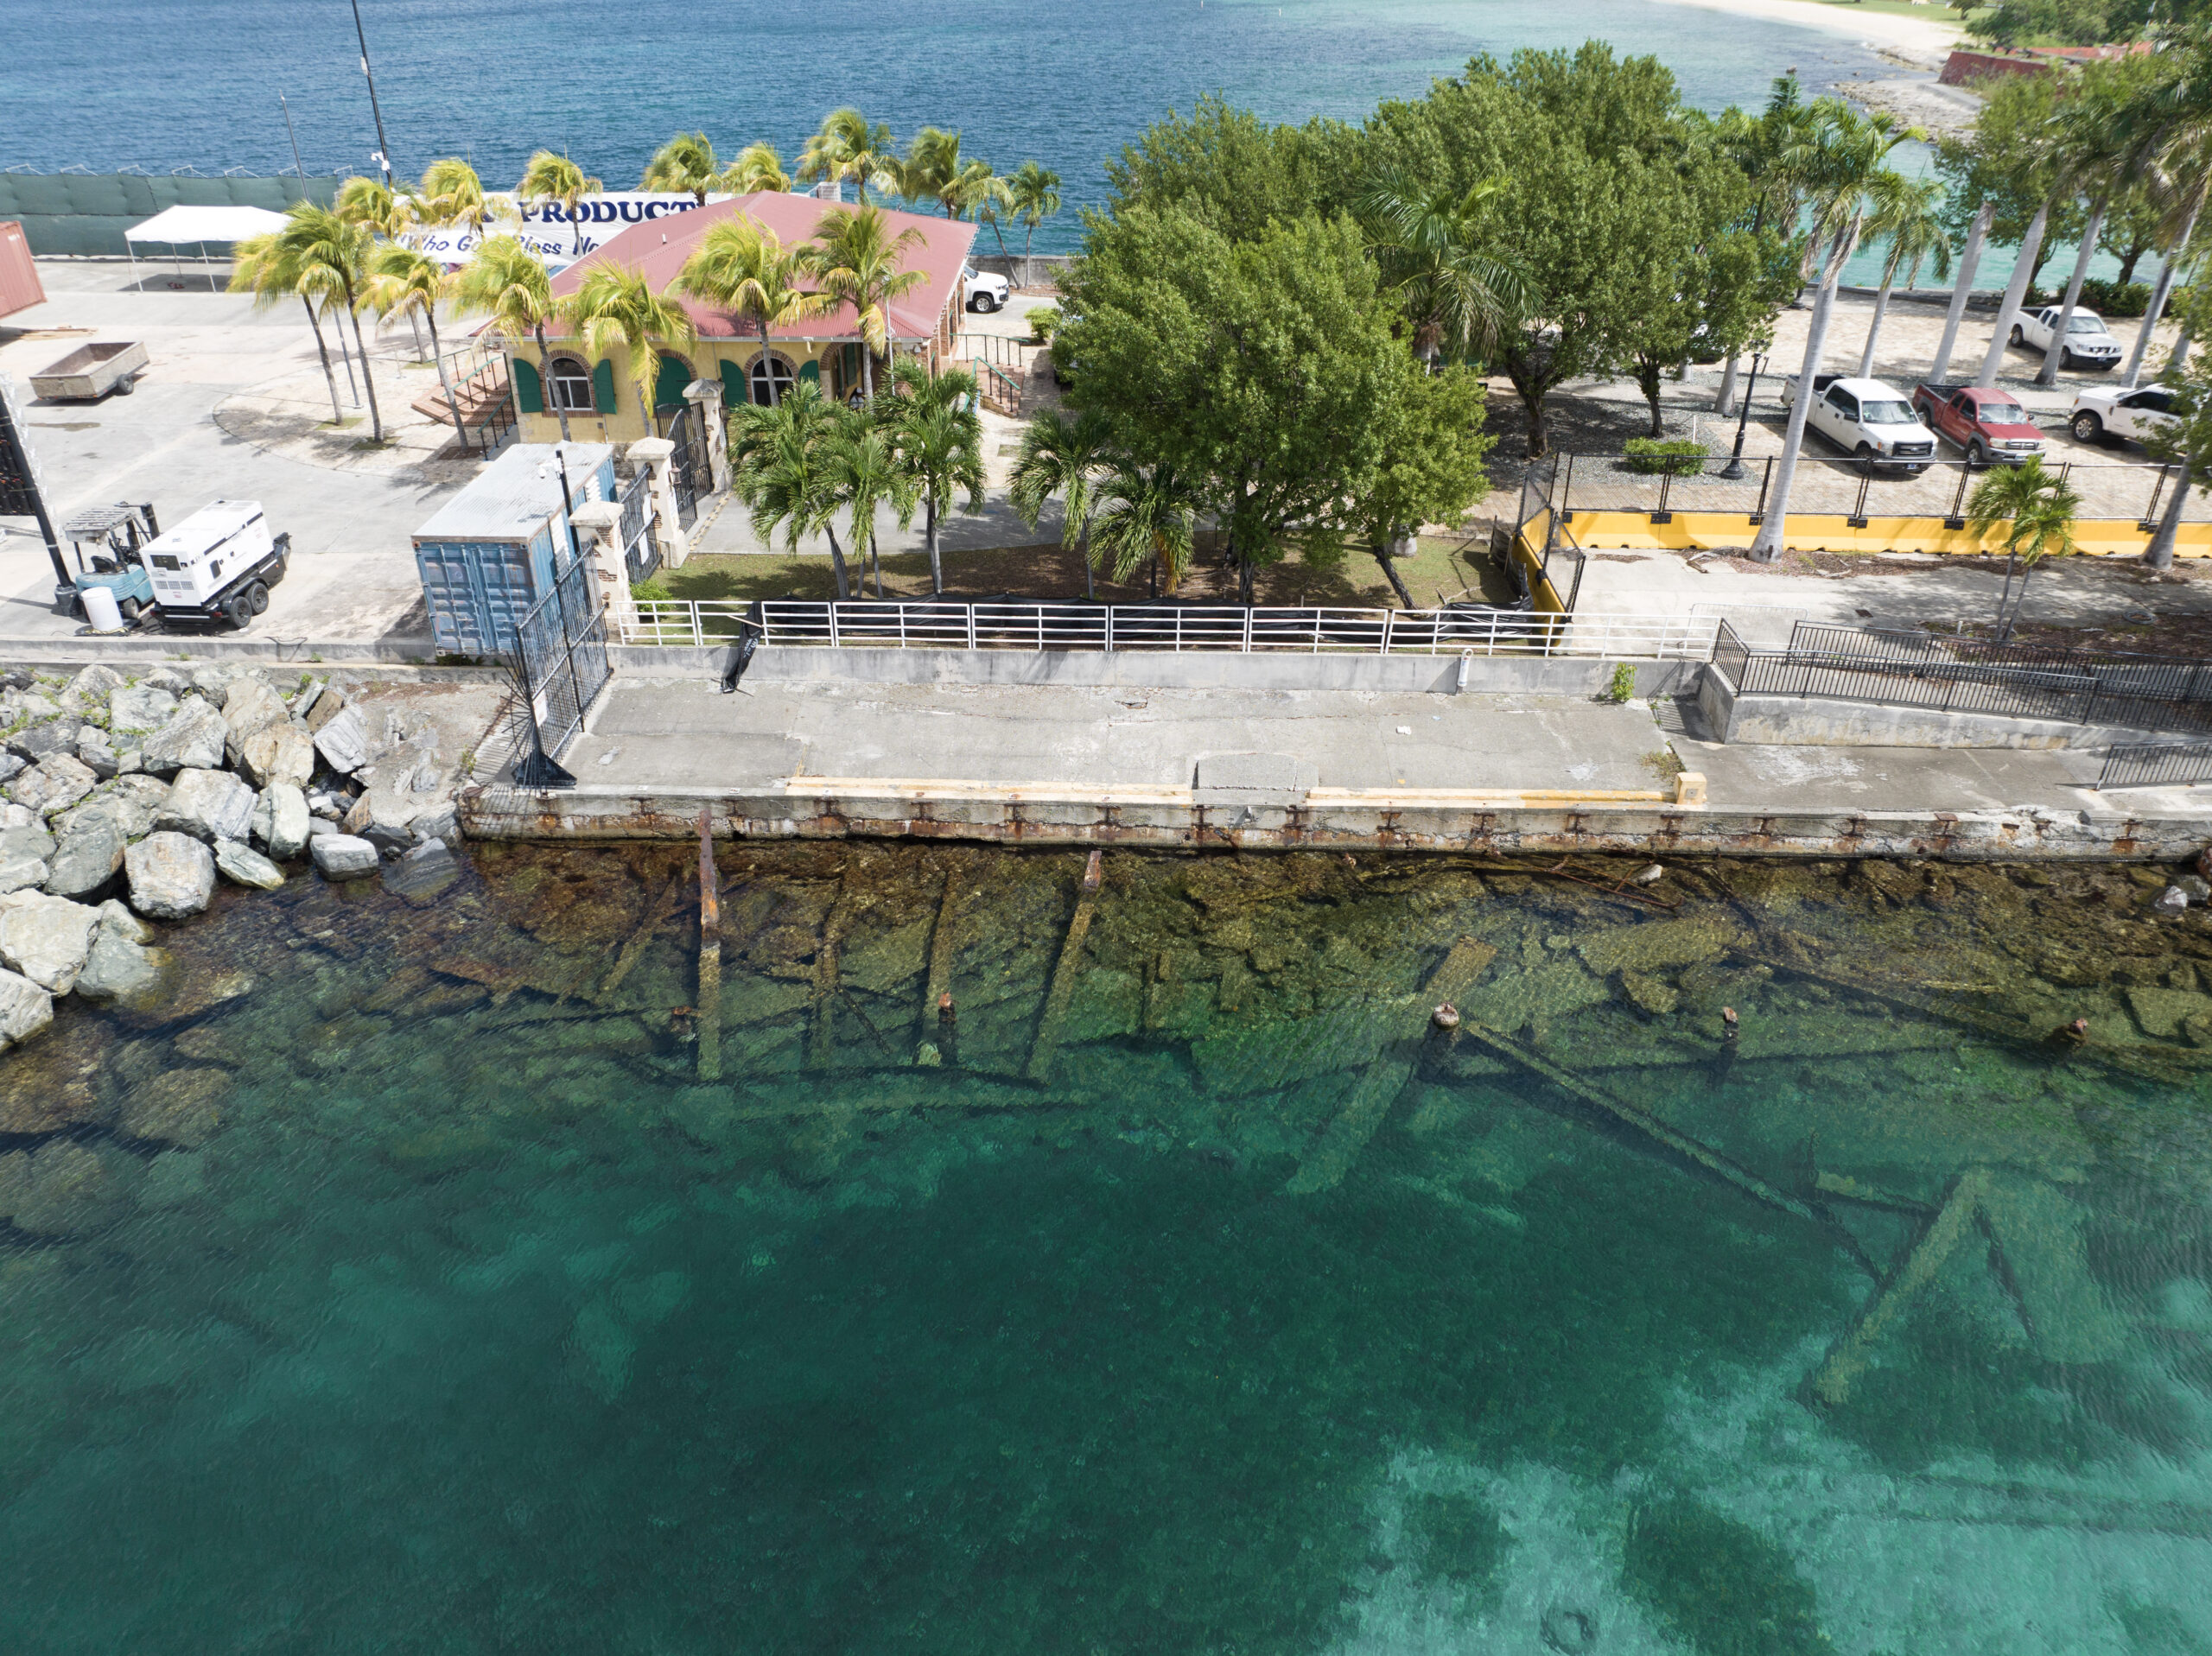 The tender pier landing at the Ann E. Abramson Marine Facility on St. Croix is used by water tour operators and fishermen but was damaged by the twin Category 5 hurricanes of September 2017. (Photo courtesy V.I. Port Authority)